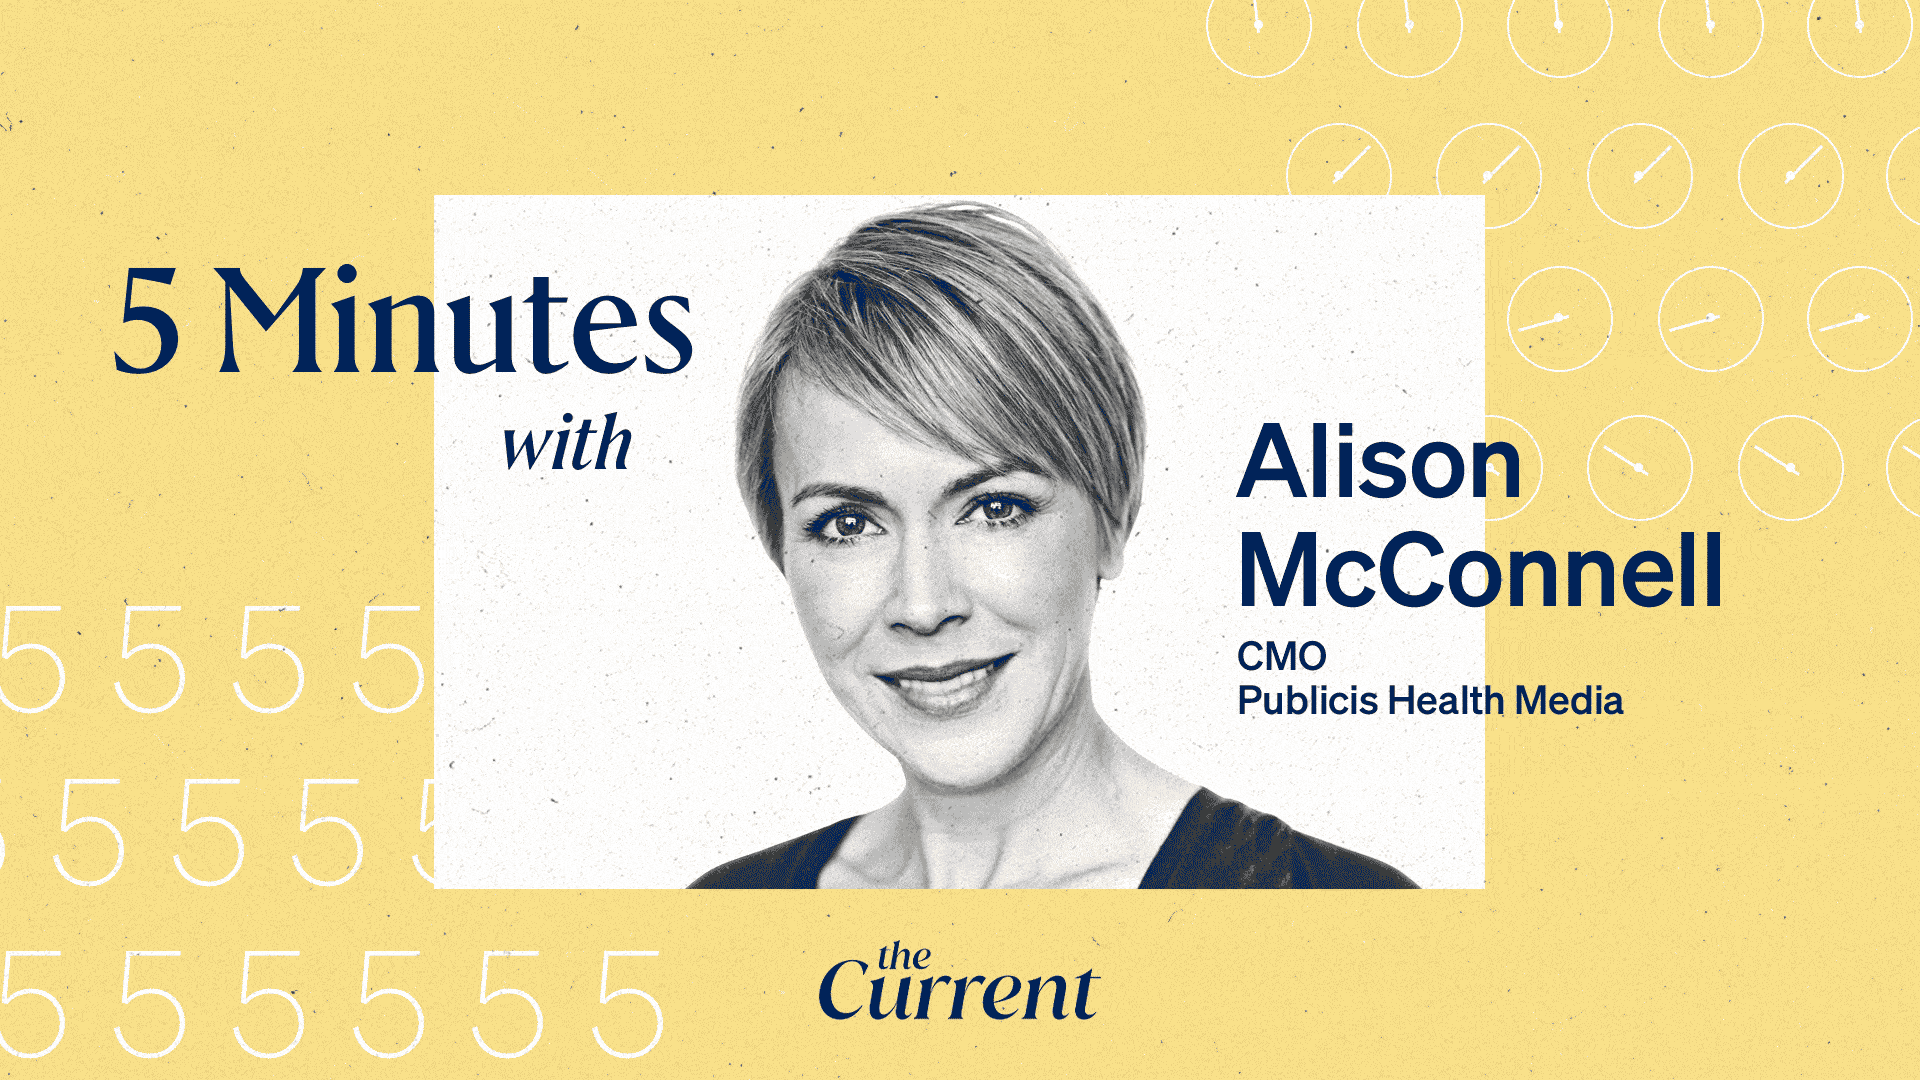 5 minutes with Alison McConnell, CMO, Publicis Health Media